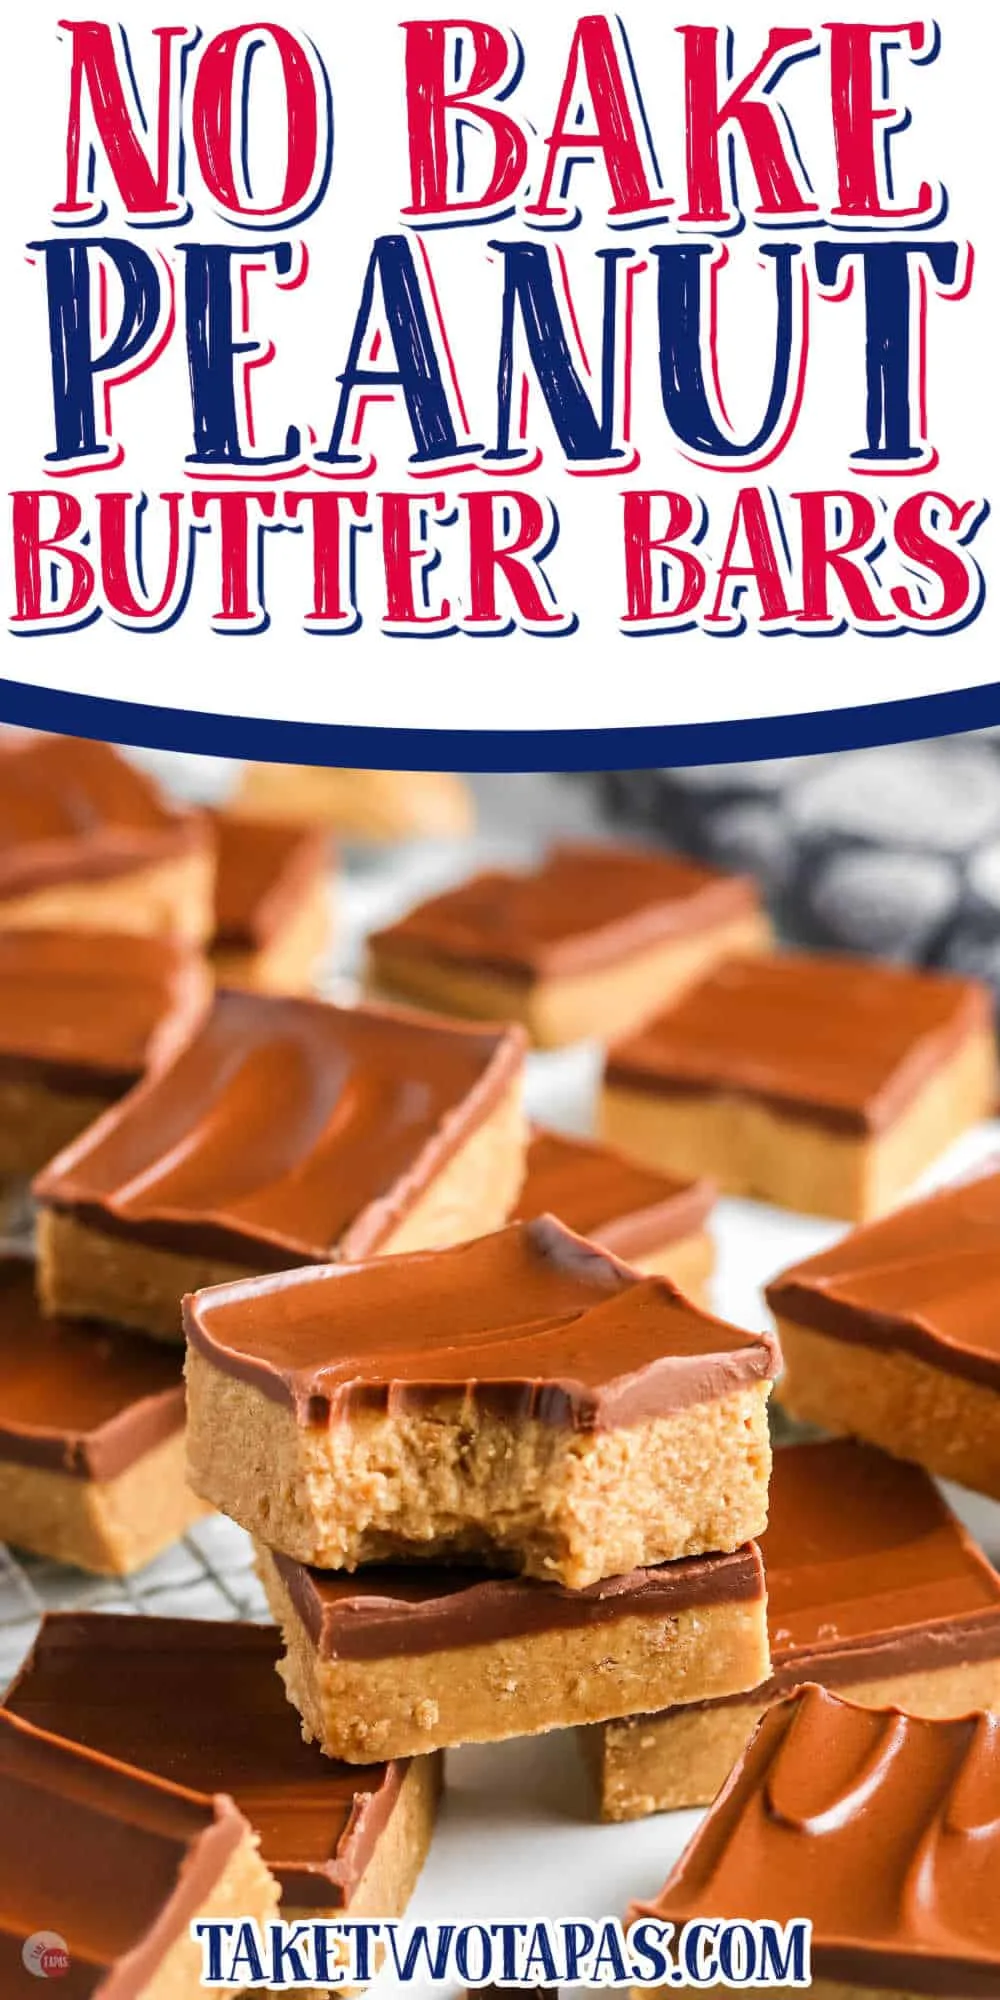 collage of no bake bars with text "peanut butter bars"